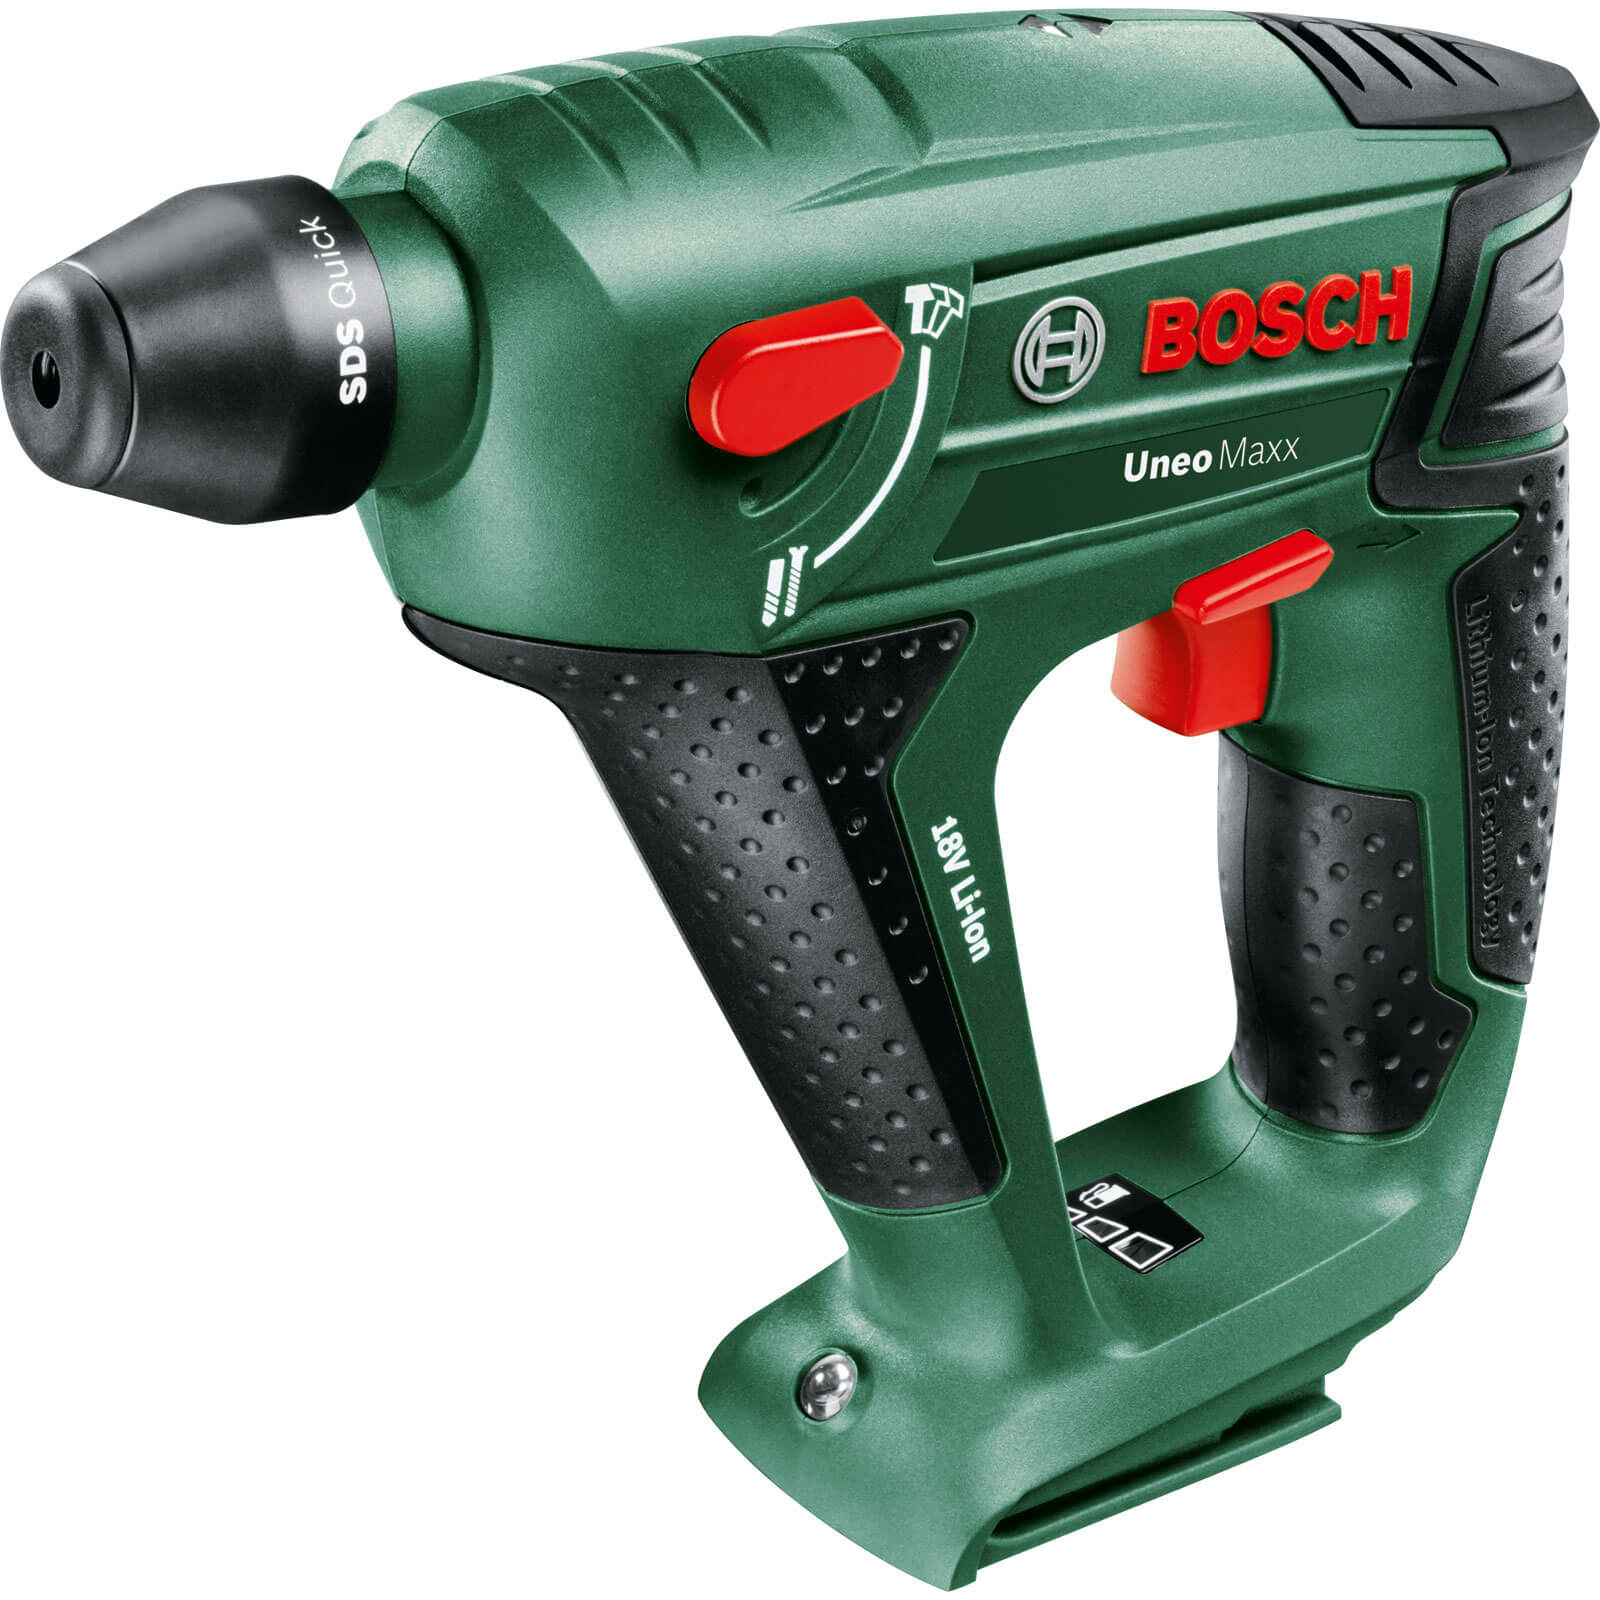 Bosch POWER4ALL UNEO Maxx 18v Cordless 3 in 1 SDS Quick Combi Drill without Battery or Charger